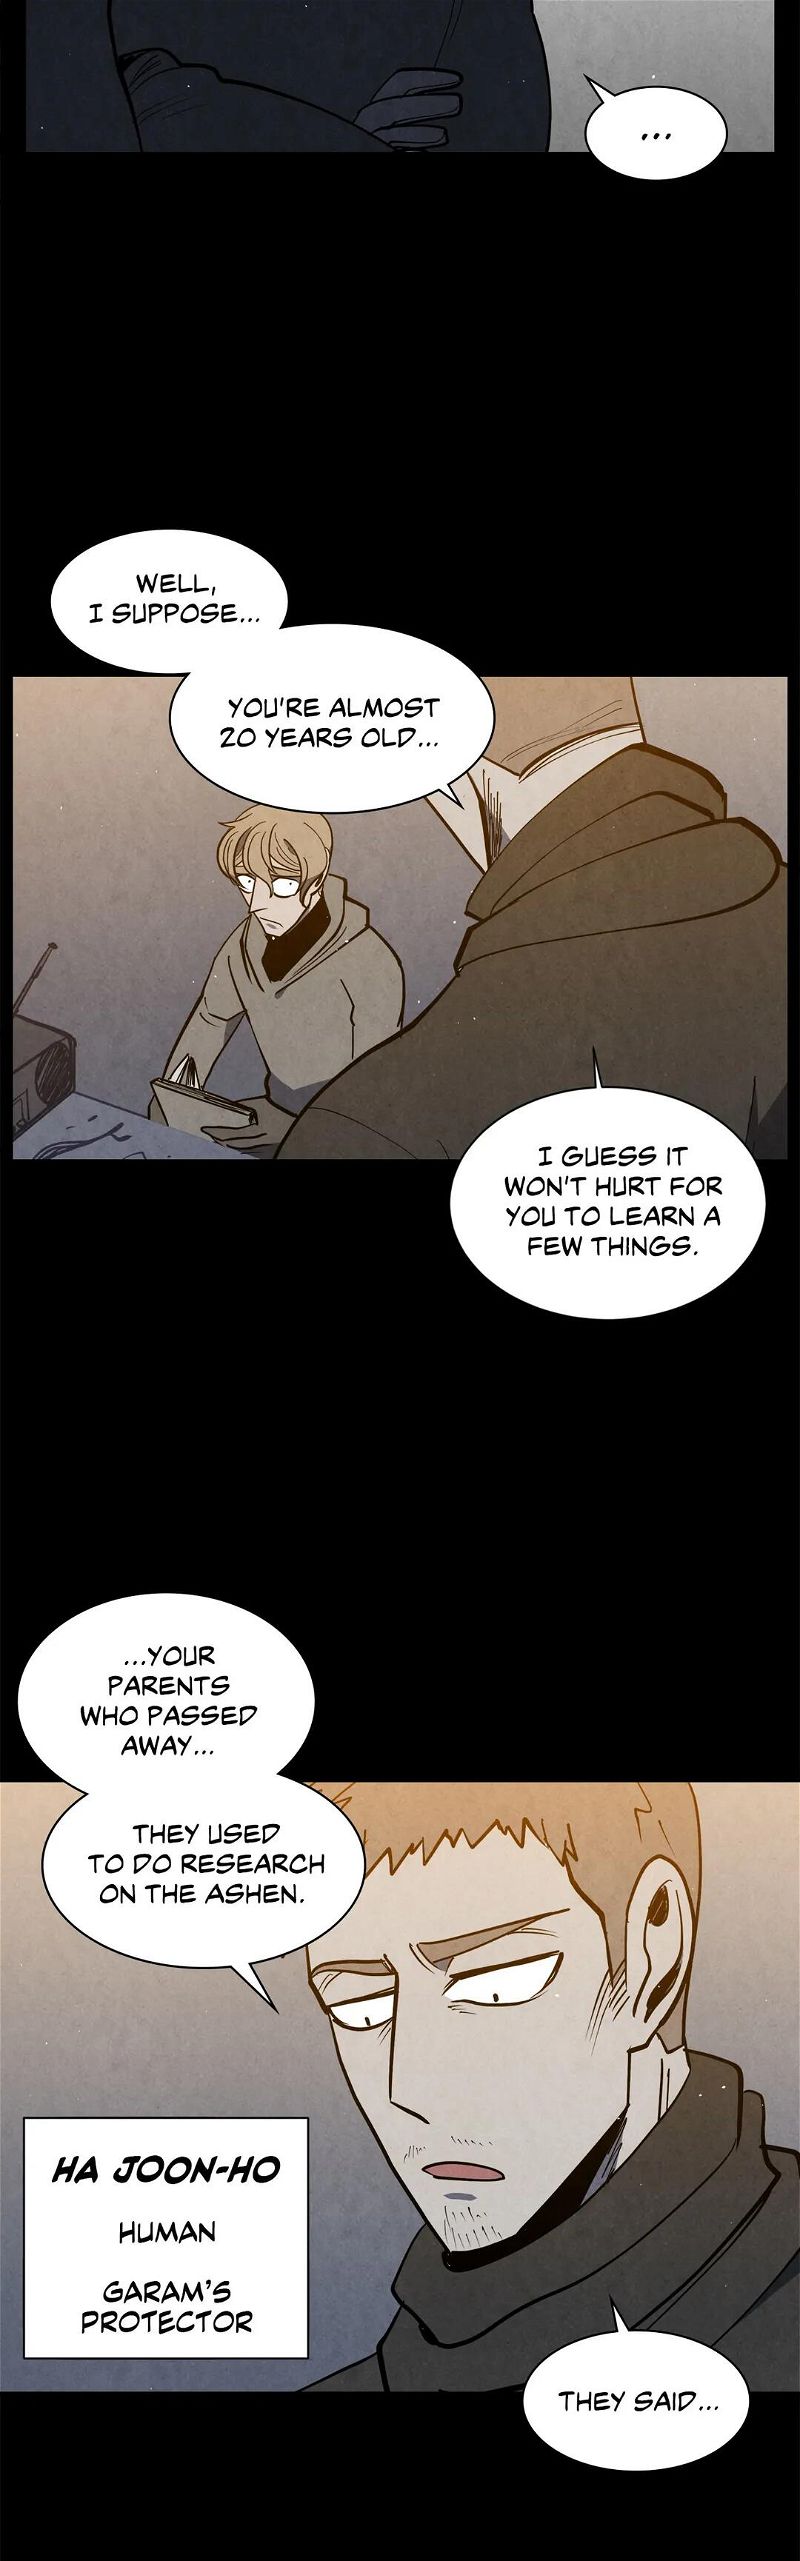 The Ashen Snowfield Chapter 51 page 3